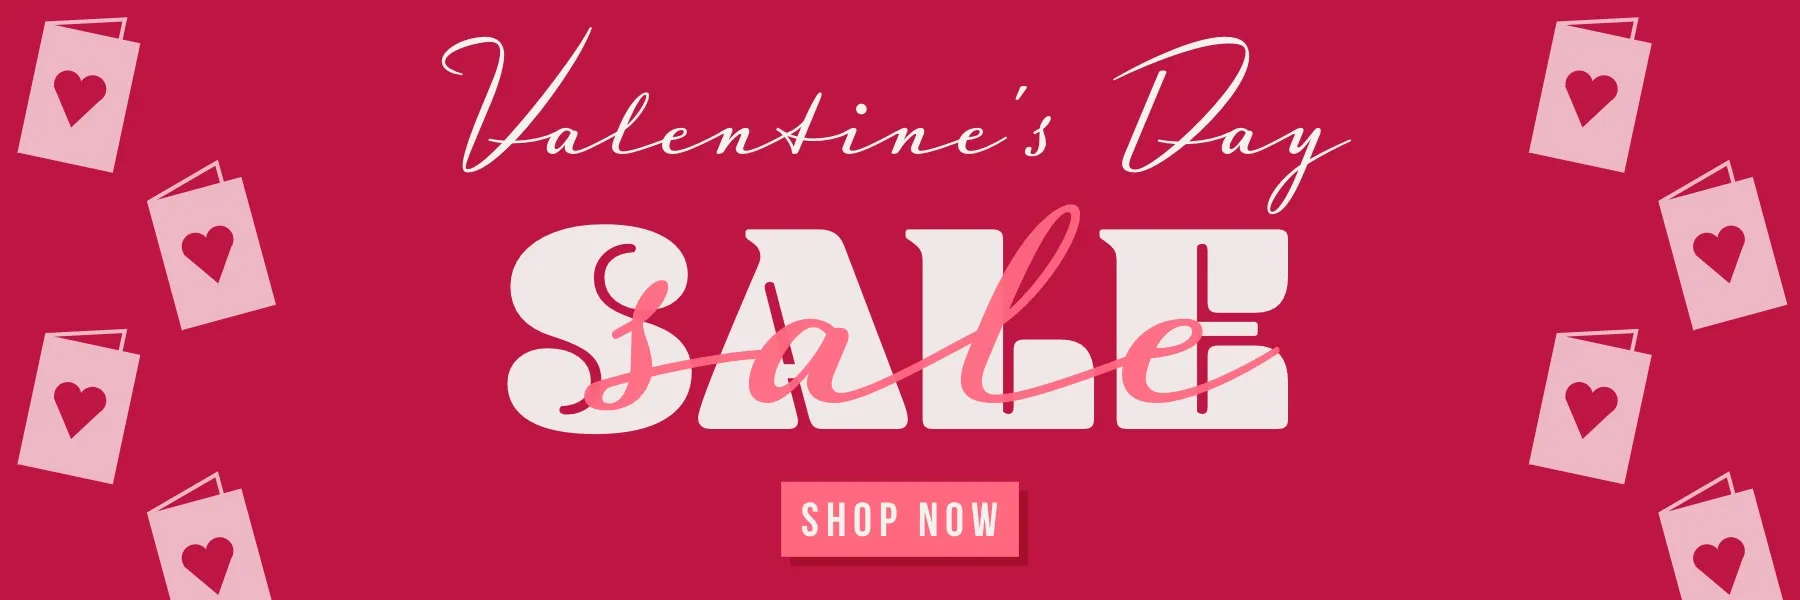 Pink and White Valentines Day Sale Web Banner